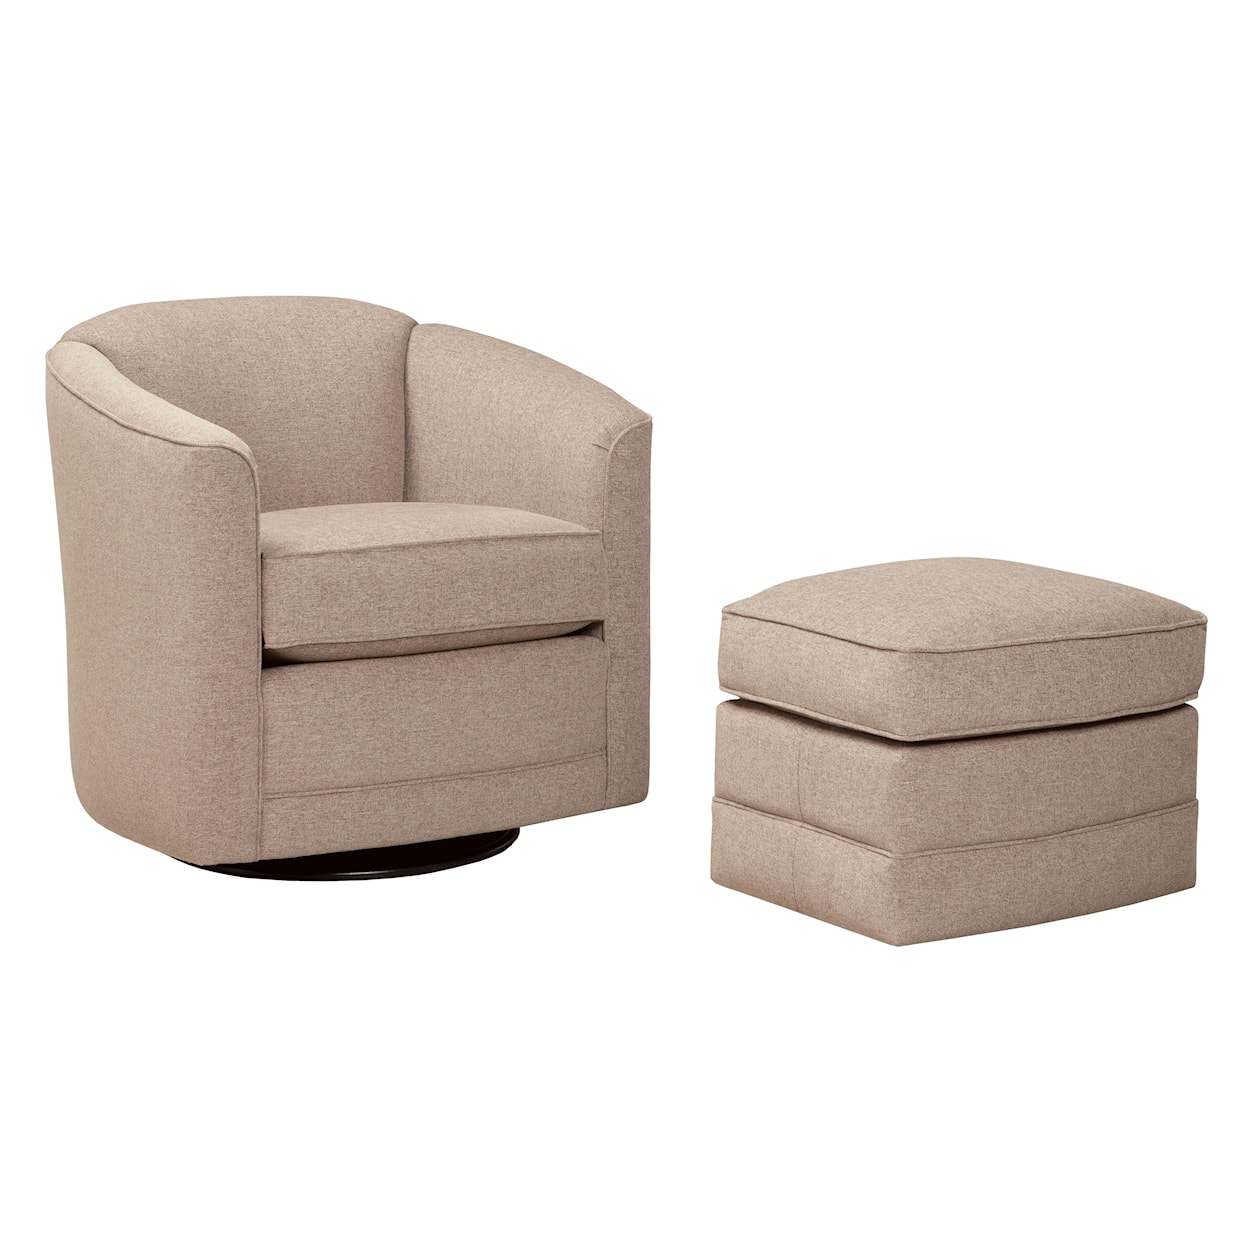 Smith Brothers 506 Swivel Glider Chair and Ottoman Set